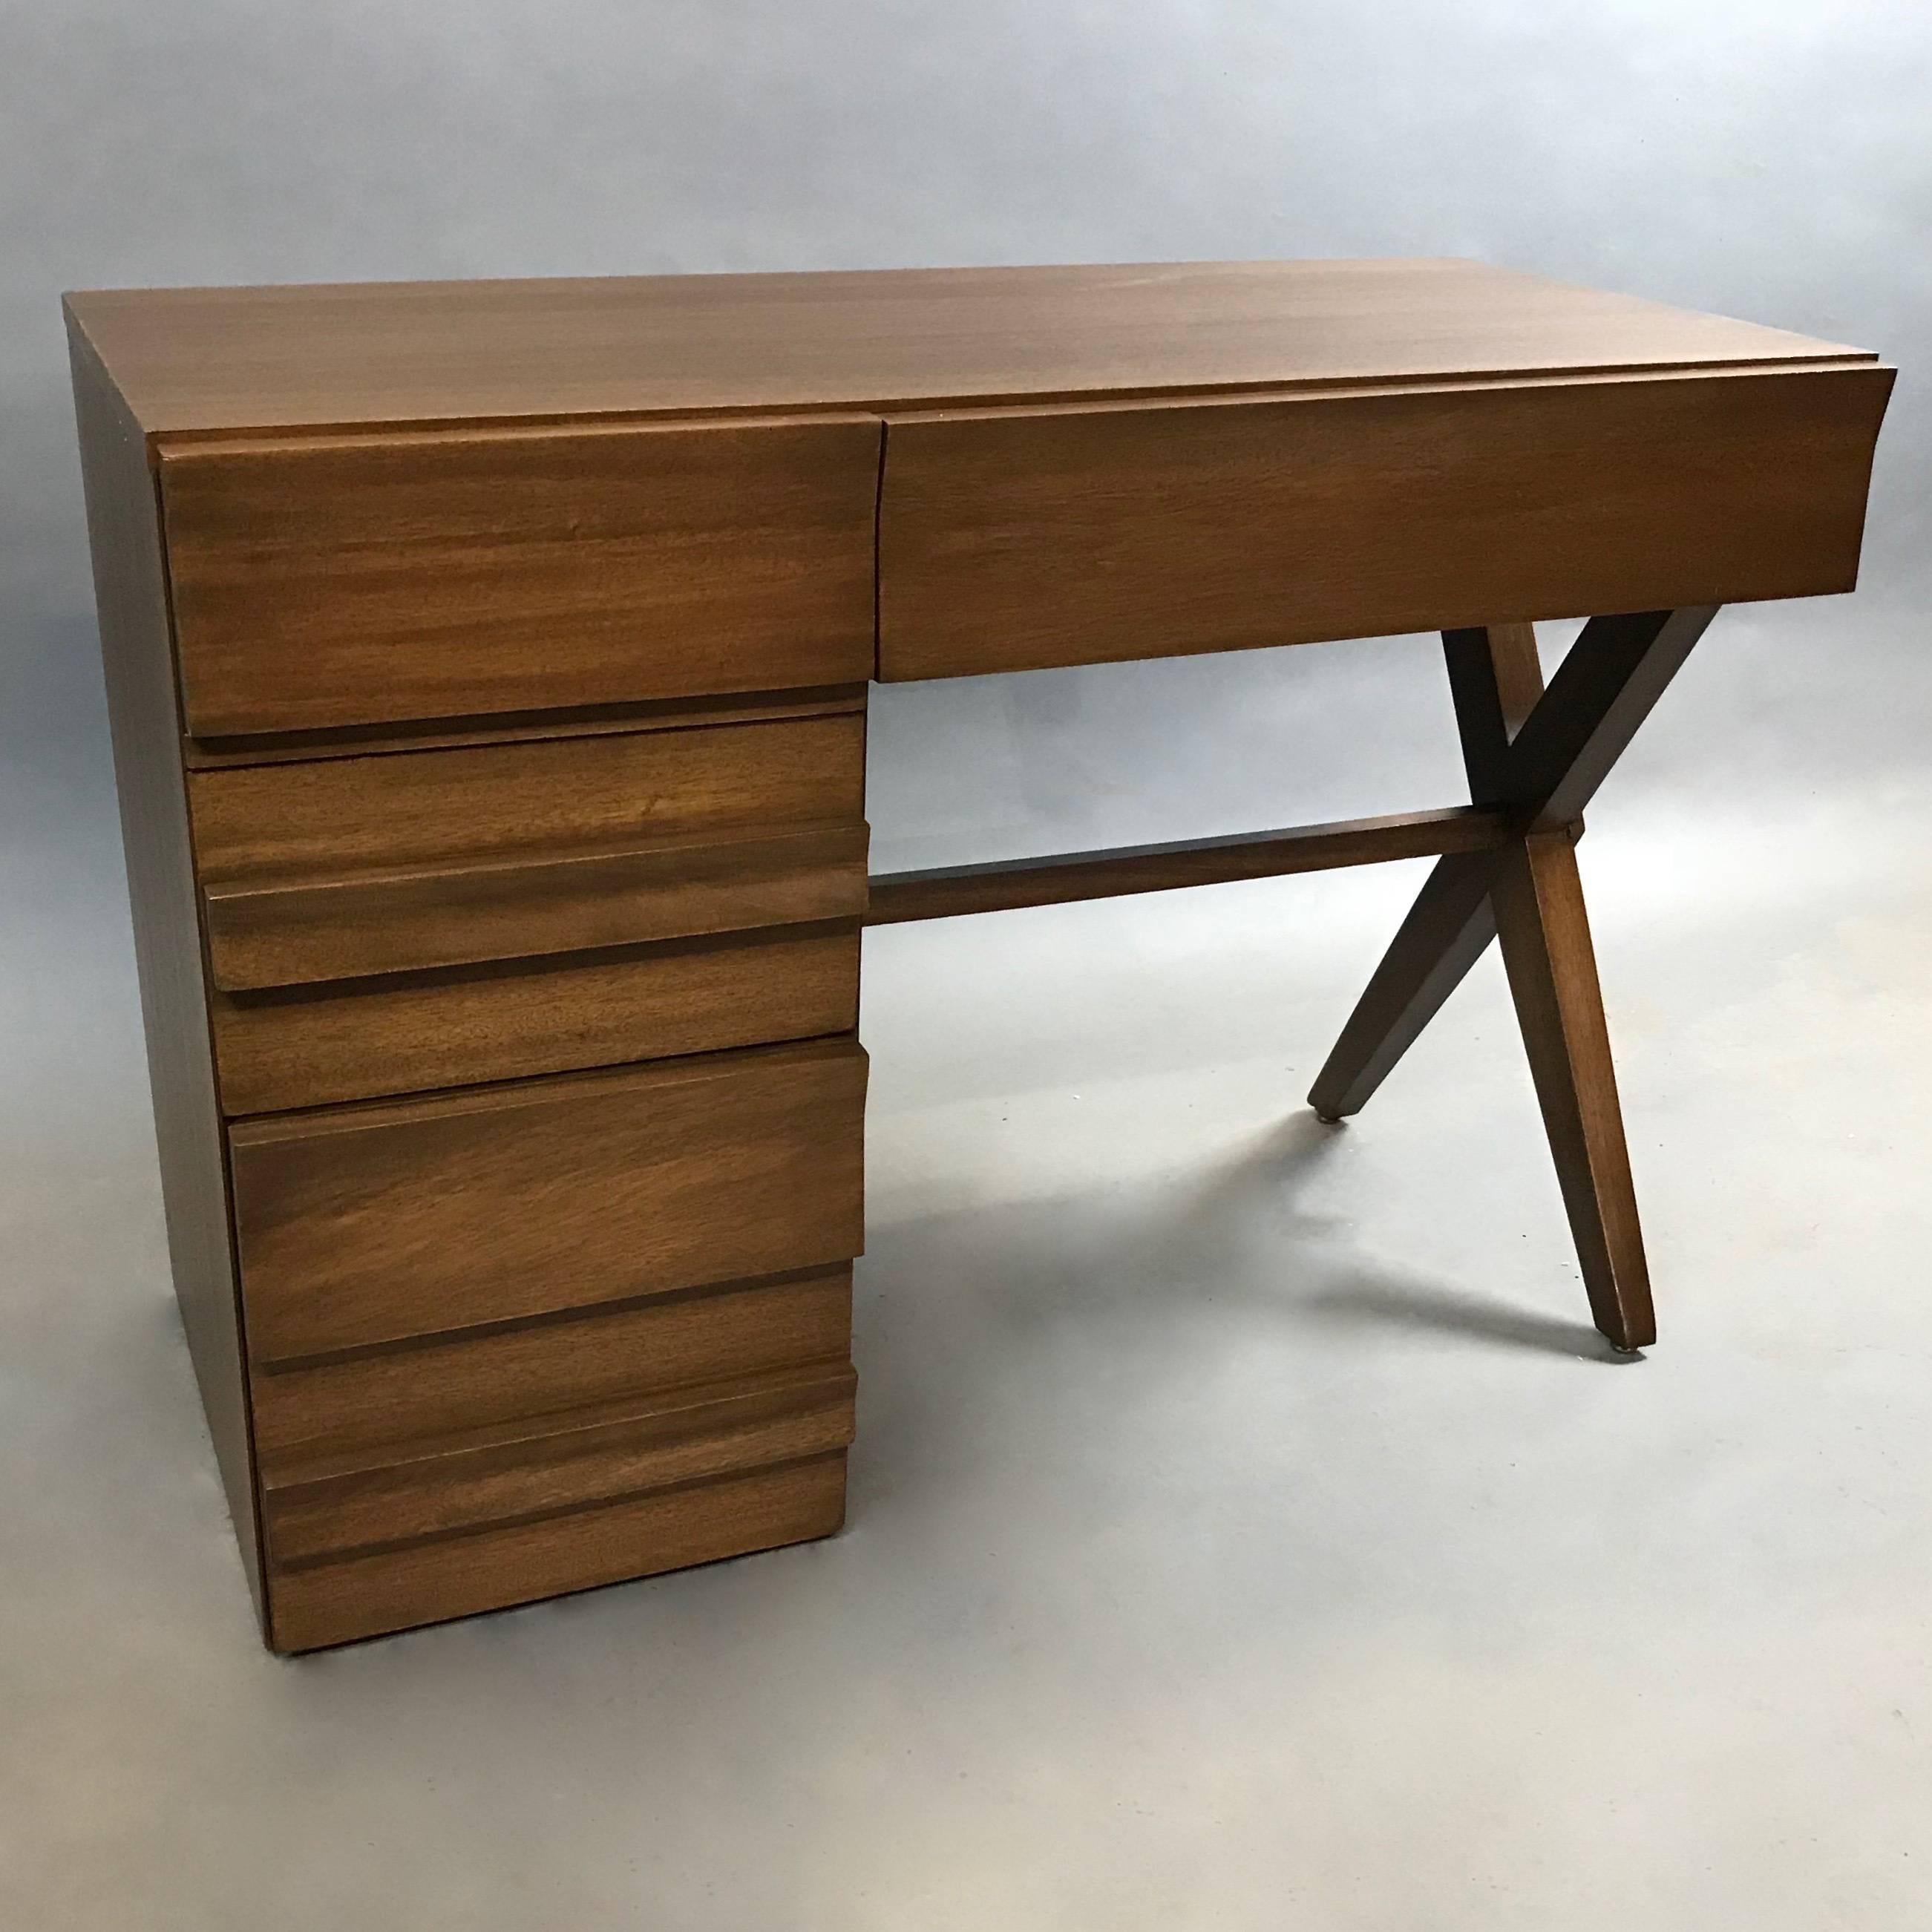 Highly styled, compact, Mid-Century Modern, mahogany pedestal desk features three decoratively hidden drawers with a carved undulating pattern throughout, detailed X-base and pull-out shelf. Seat clearance is 24.5in ht. The bottom drawer is deep